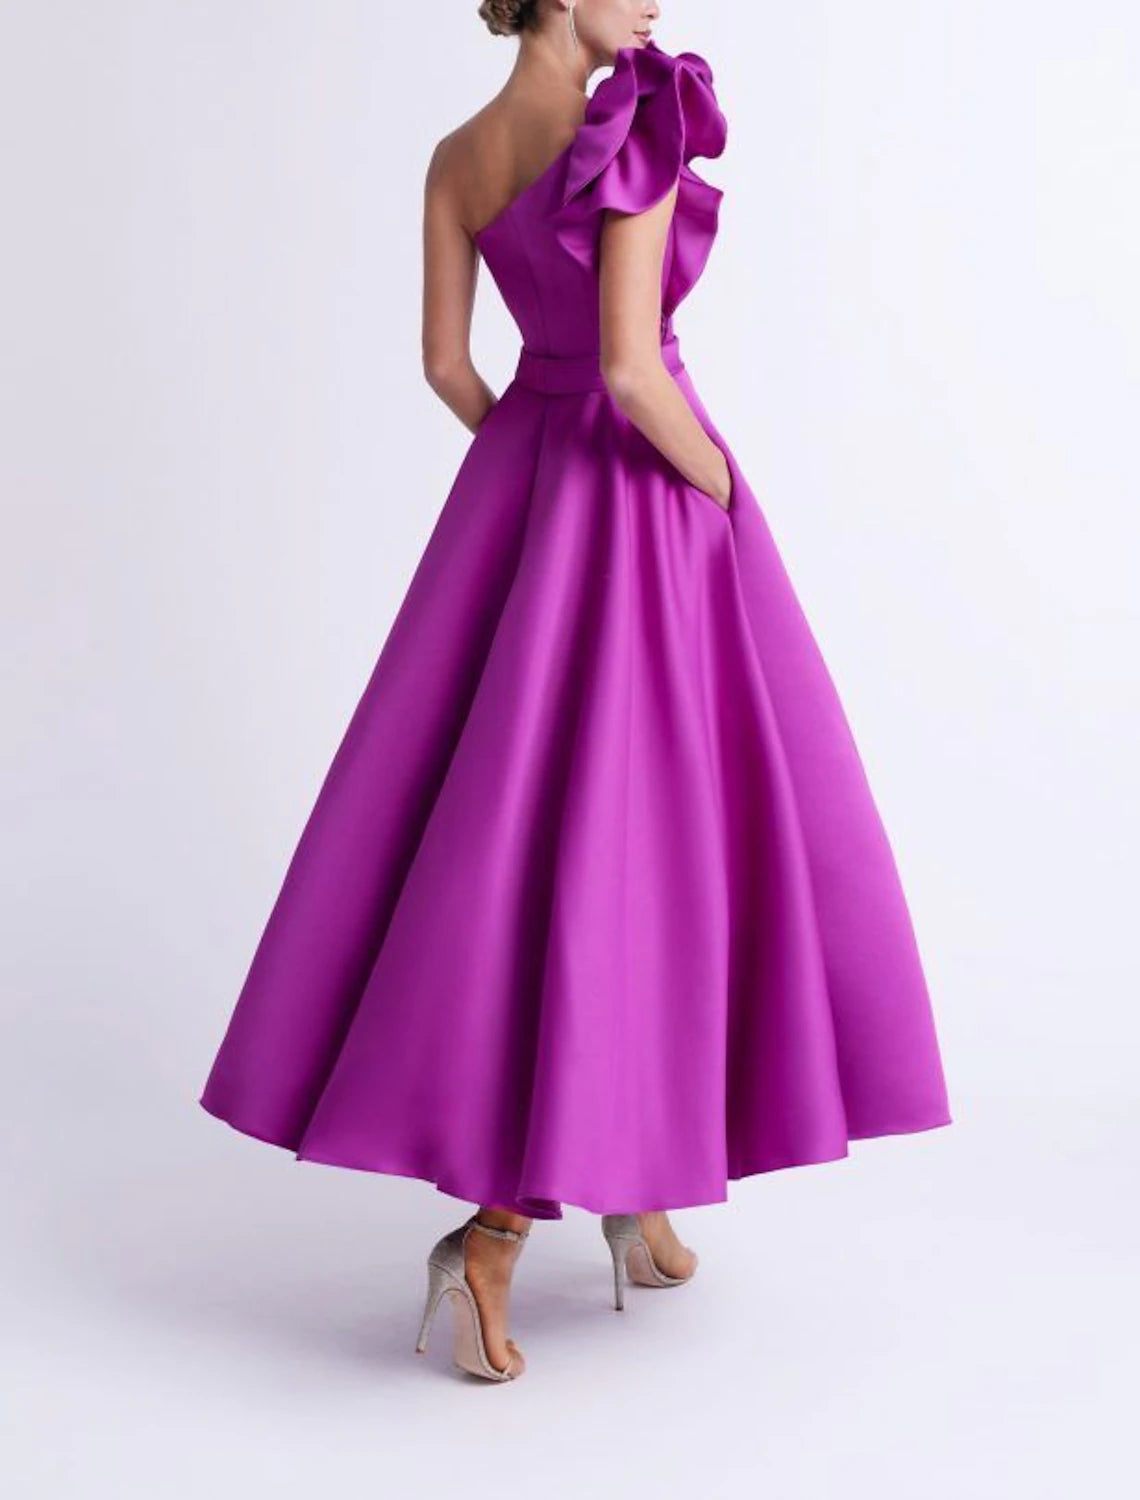 Wholesa A-Line Cocktail Dresses Elegant Dress Wedding Guest Party Wear Ankle Length Sleeveless One Shoulder Pocket Satin with Ruffles